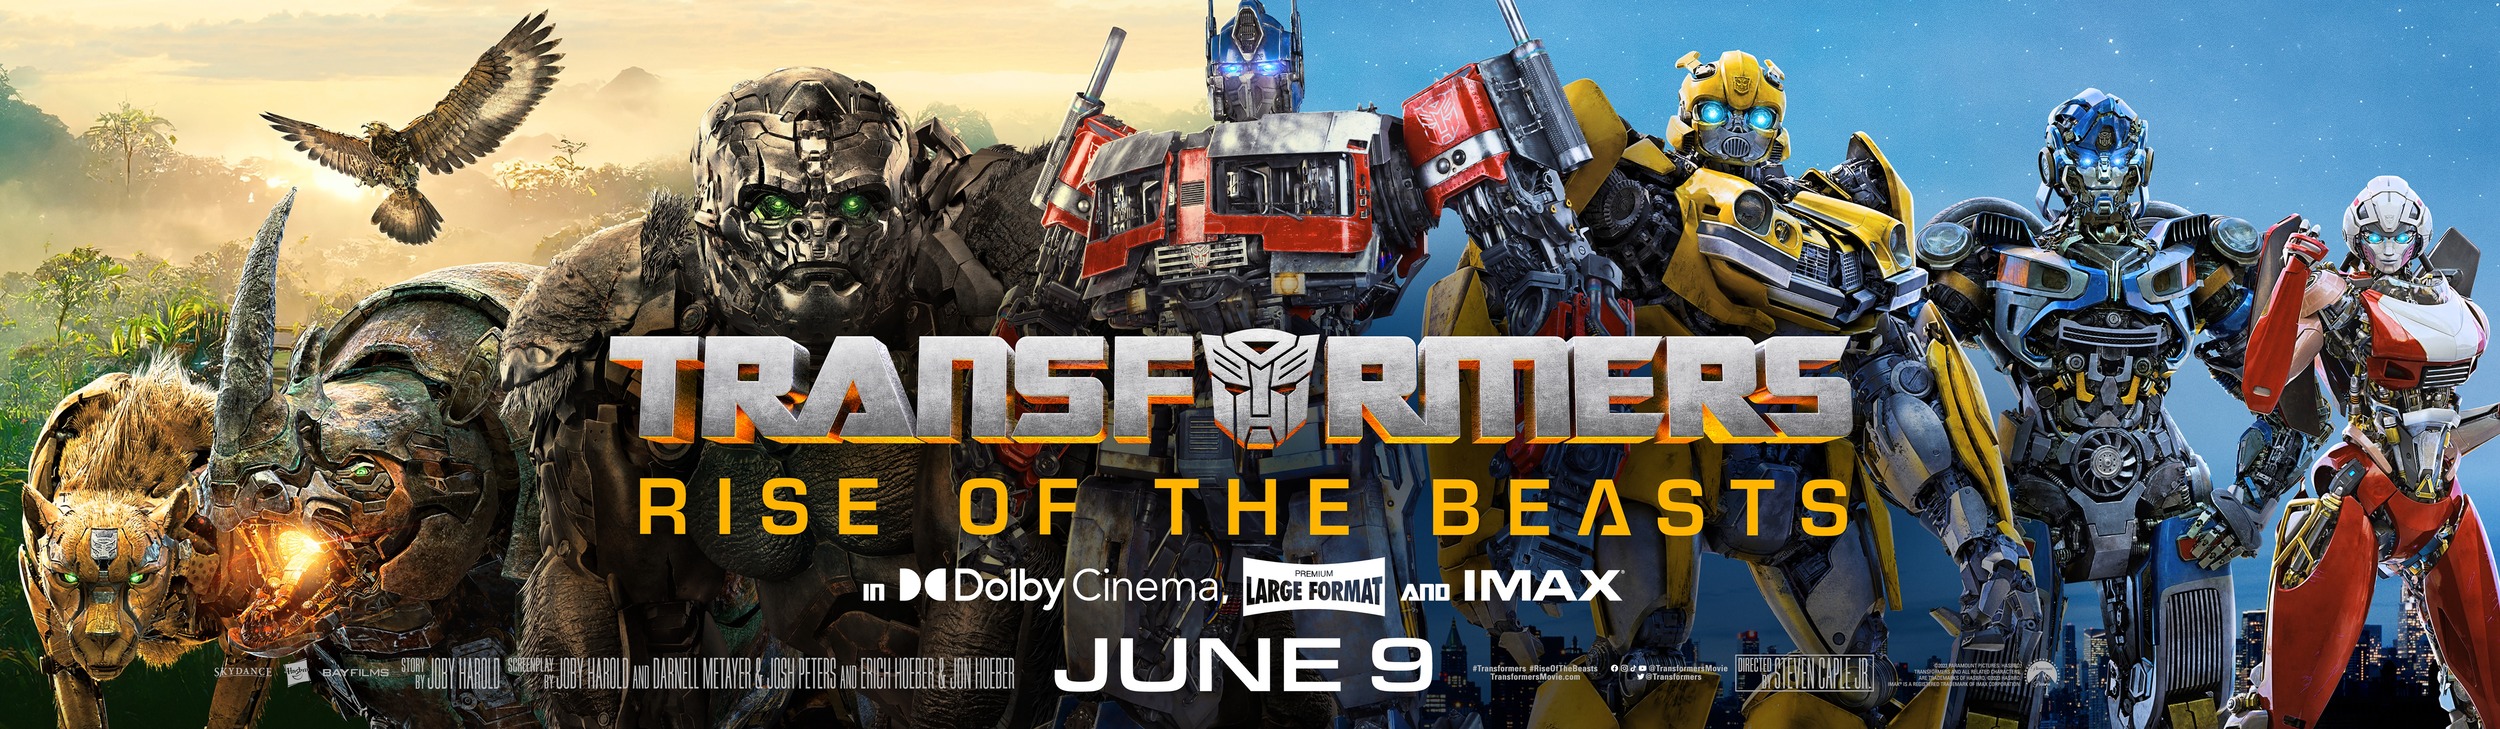 Mega Sized Movie Poster Image for Transformers: Rise of the Beasts (#33 of 37)